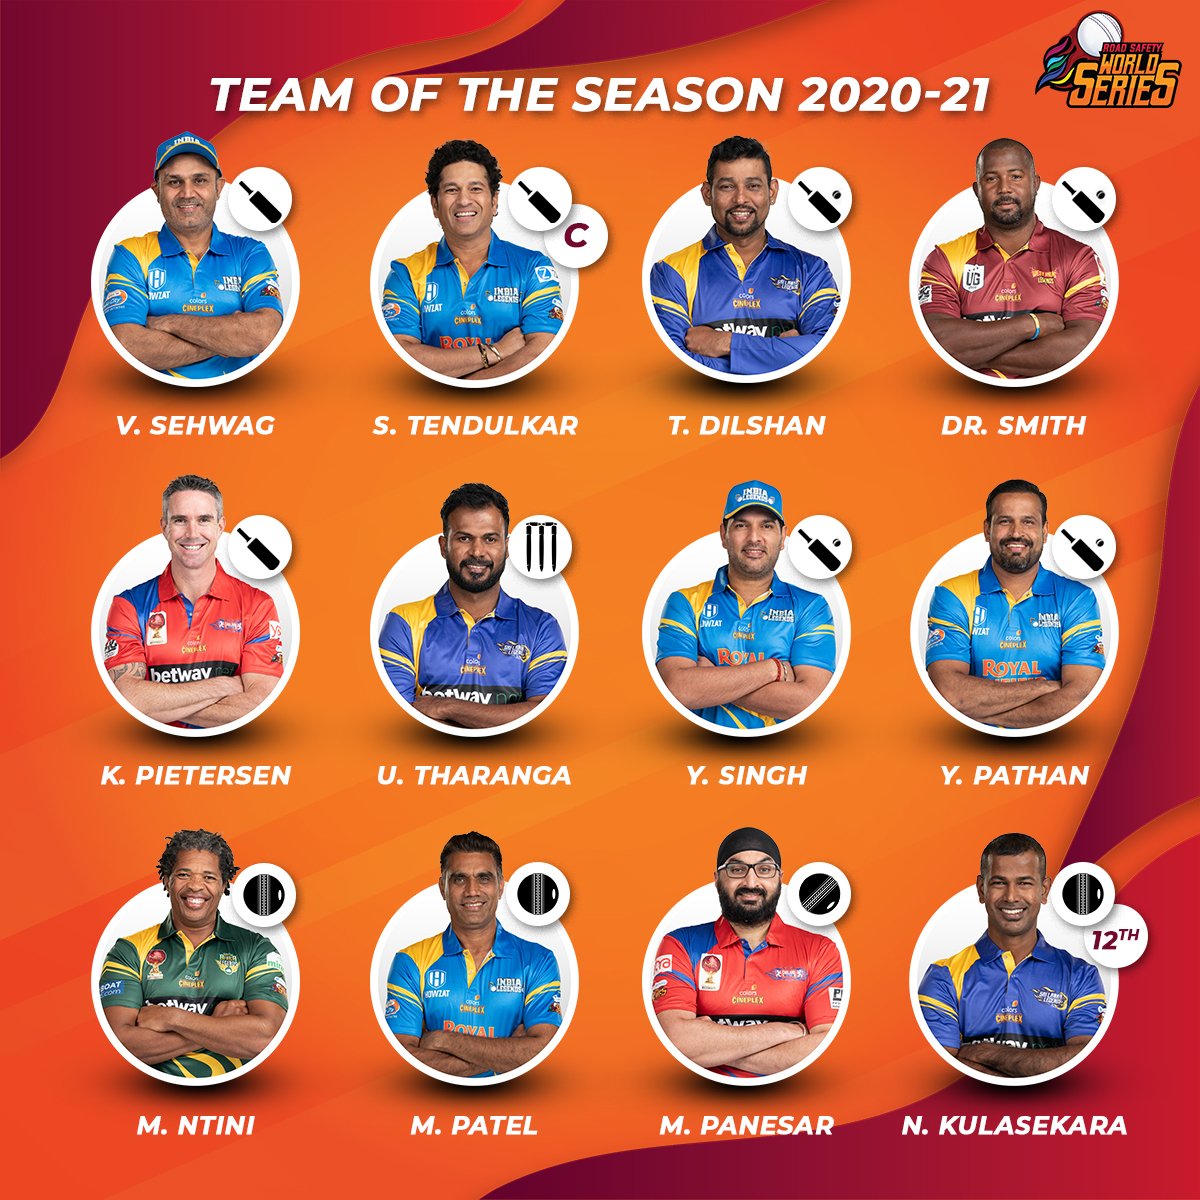 RSW Series names team of the season 2 SL players in XI